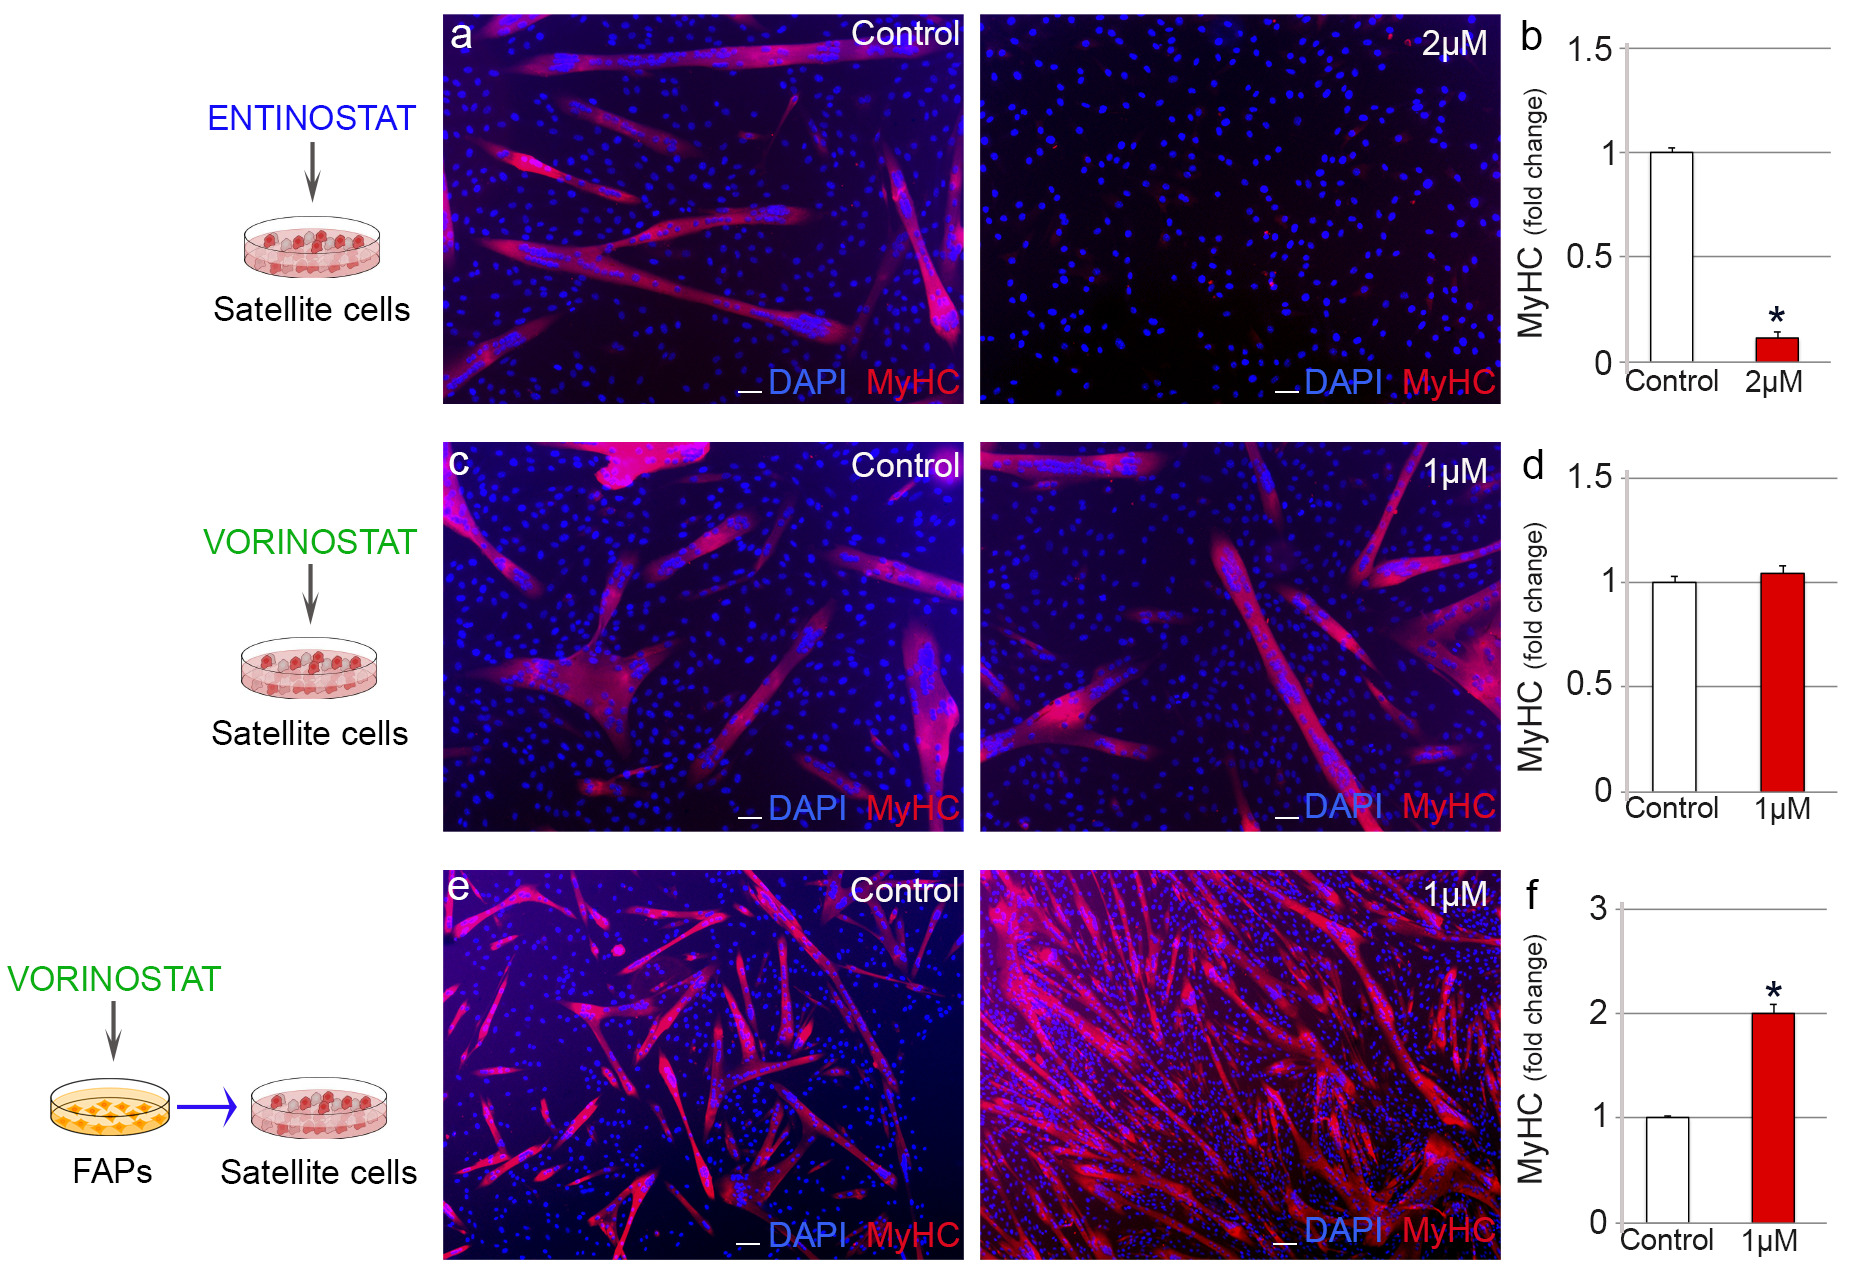 Fig. 2 
            Vorinostat modifies the myogenic potential of satellite cells through its effect on fibro-adipogenic progenitors (FAPs). a), c), and e) Representative images of satellite cells immunostained for myosin (MyHC), and b), d), and f) quantification of the myogenic differentiation after the a) to d) direct or e) and f) indirect daily administration of histone deacetylase inhibitor (HDACi). 4',6-diamidino-2-phenylindole (DAPI) was used to identify all nuclei. Scale bar, 10 μm. Numerical data in HDACi-treated cells were expressed as a fold change compared to control cells, and expressed as the mean and standard error of the mean of at least three independent experiments. *Significance between experimental groups where p < 0.05.
          